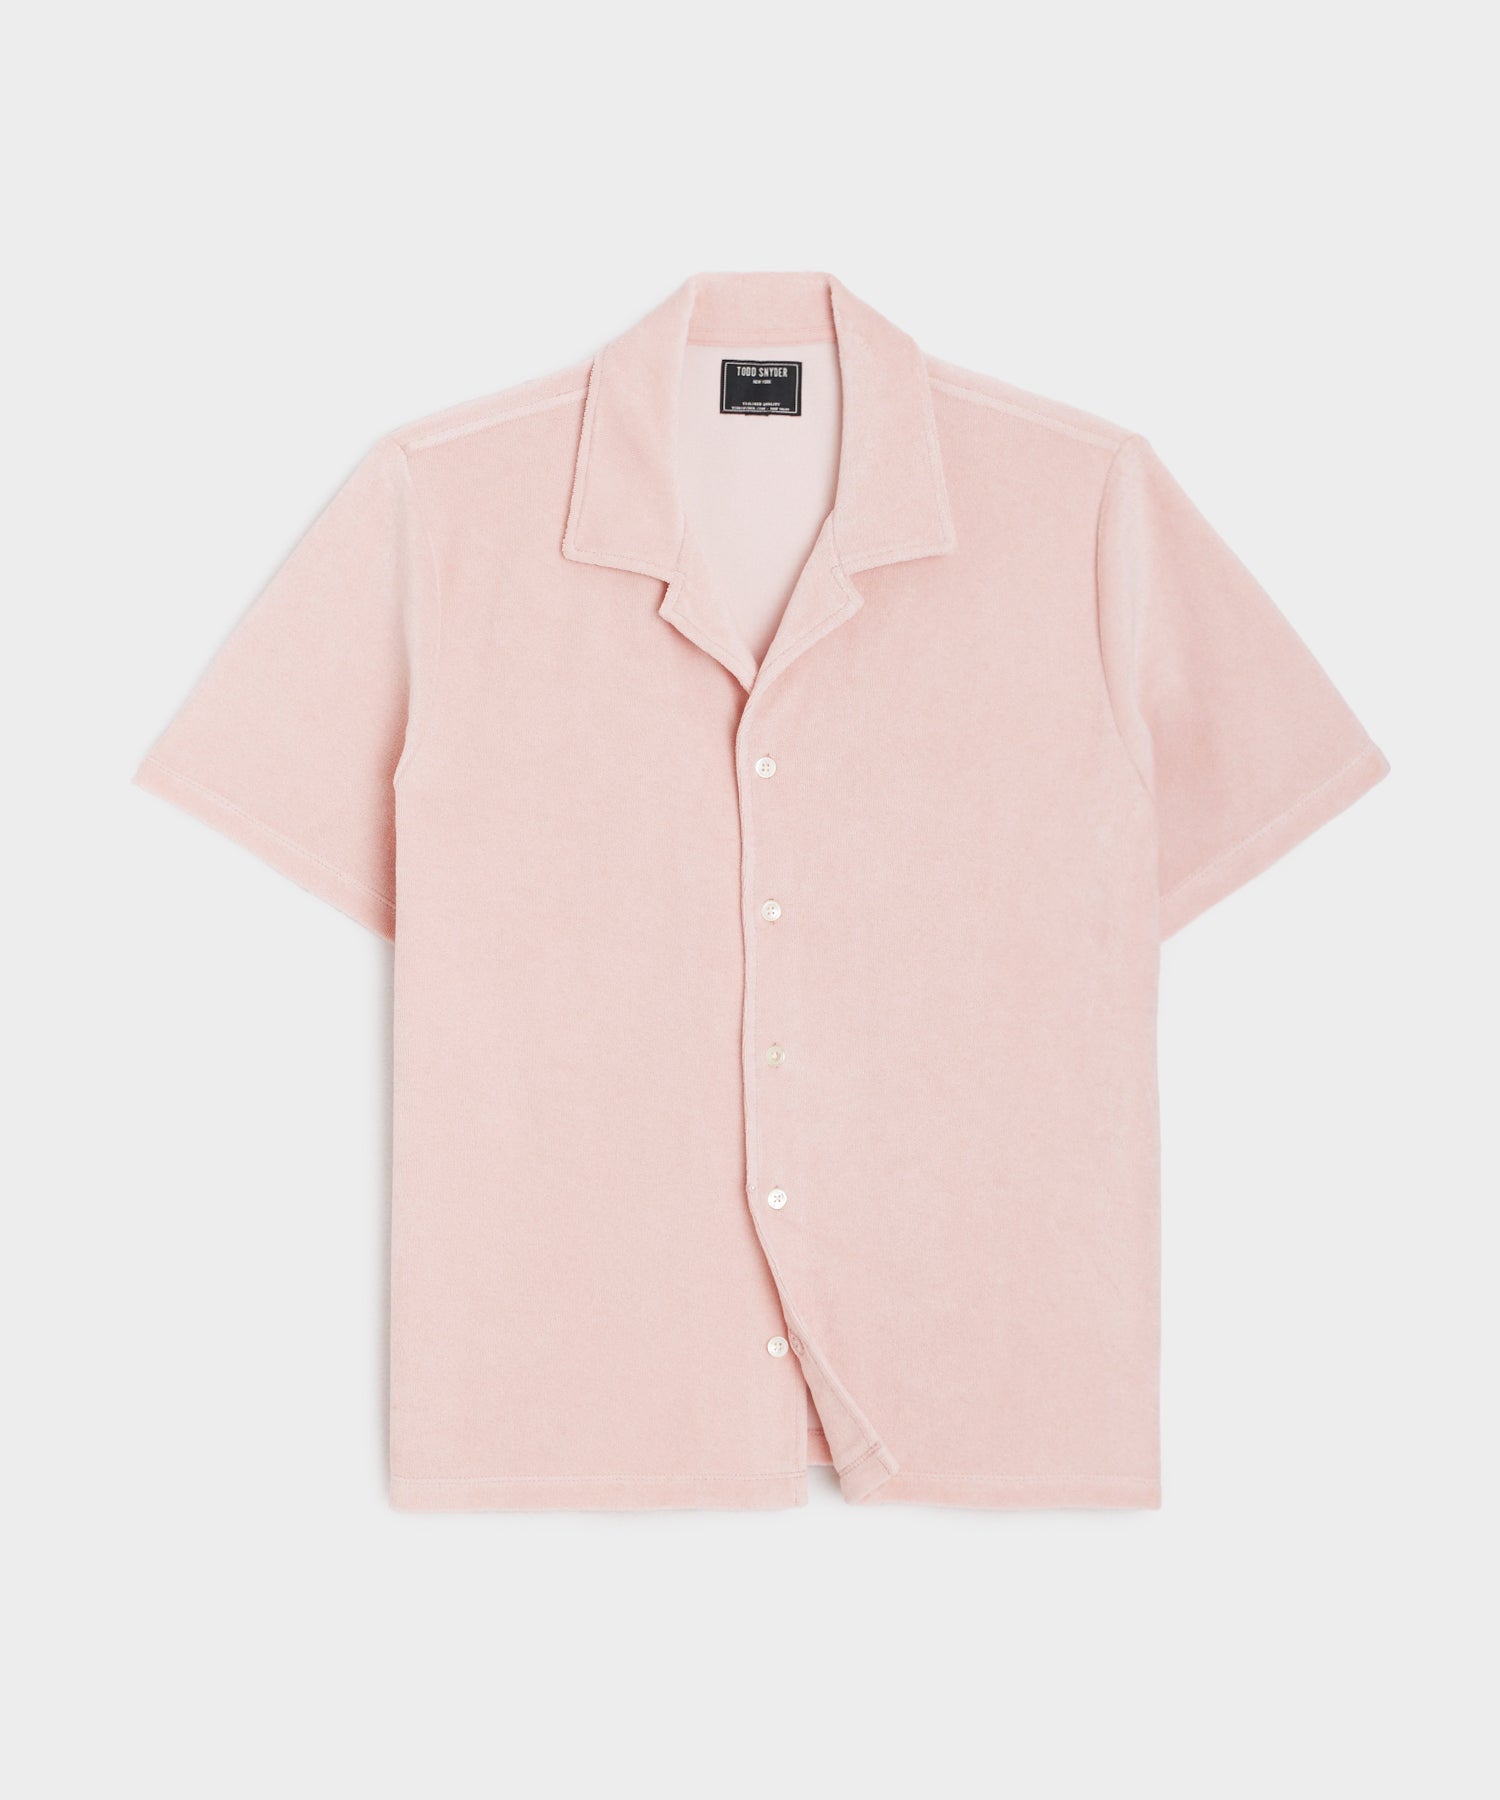 Terry Cabana Polo Shirt in Shell Pink